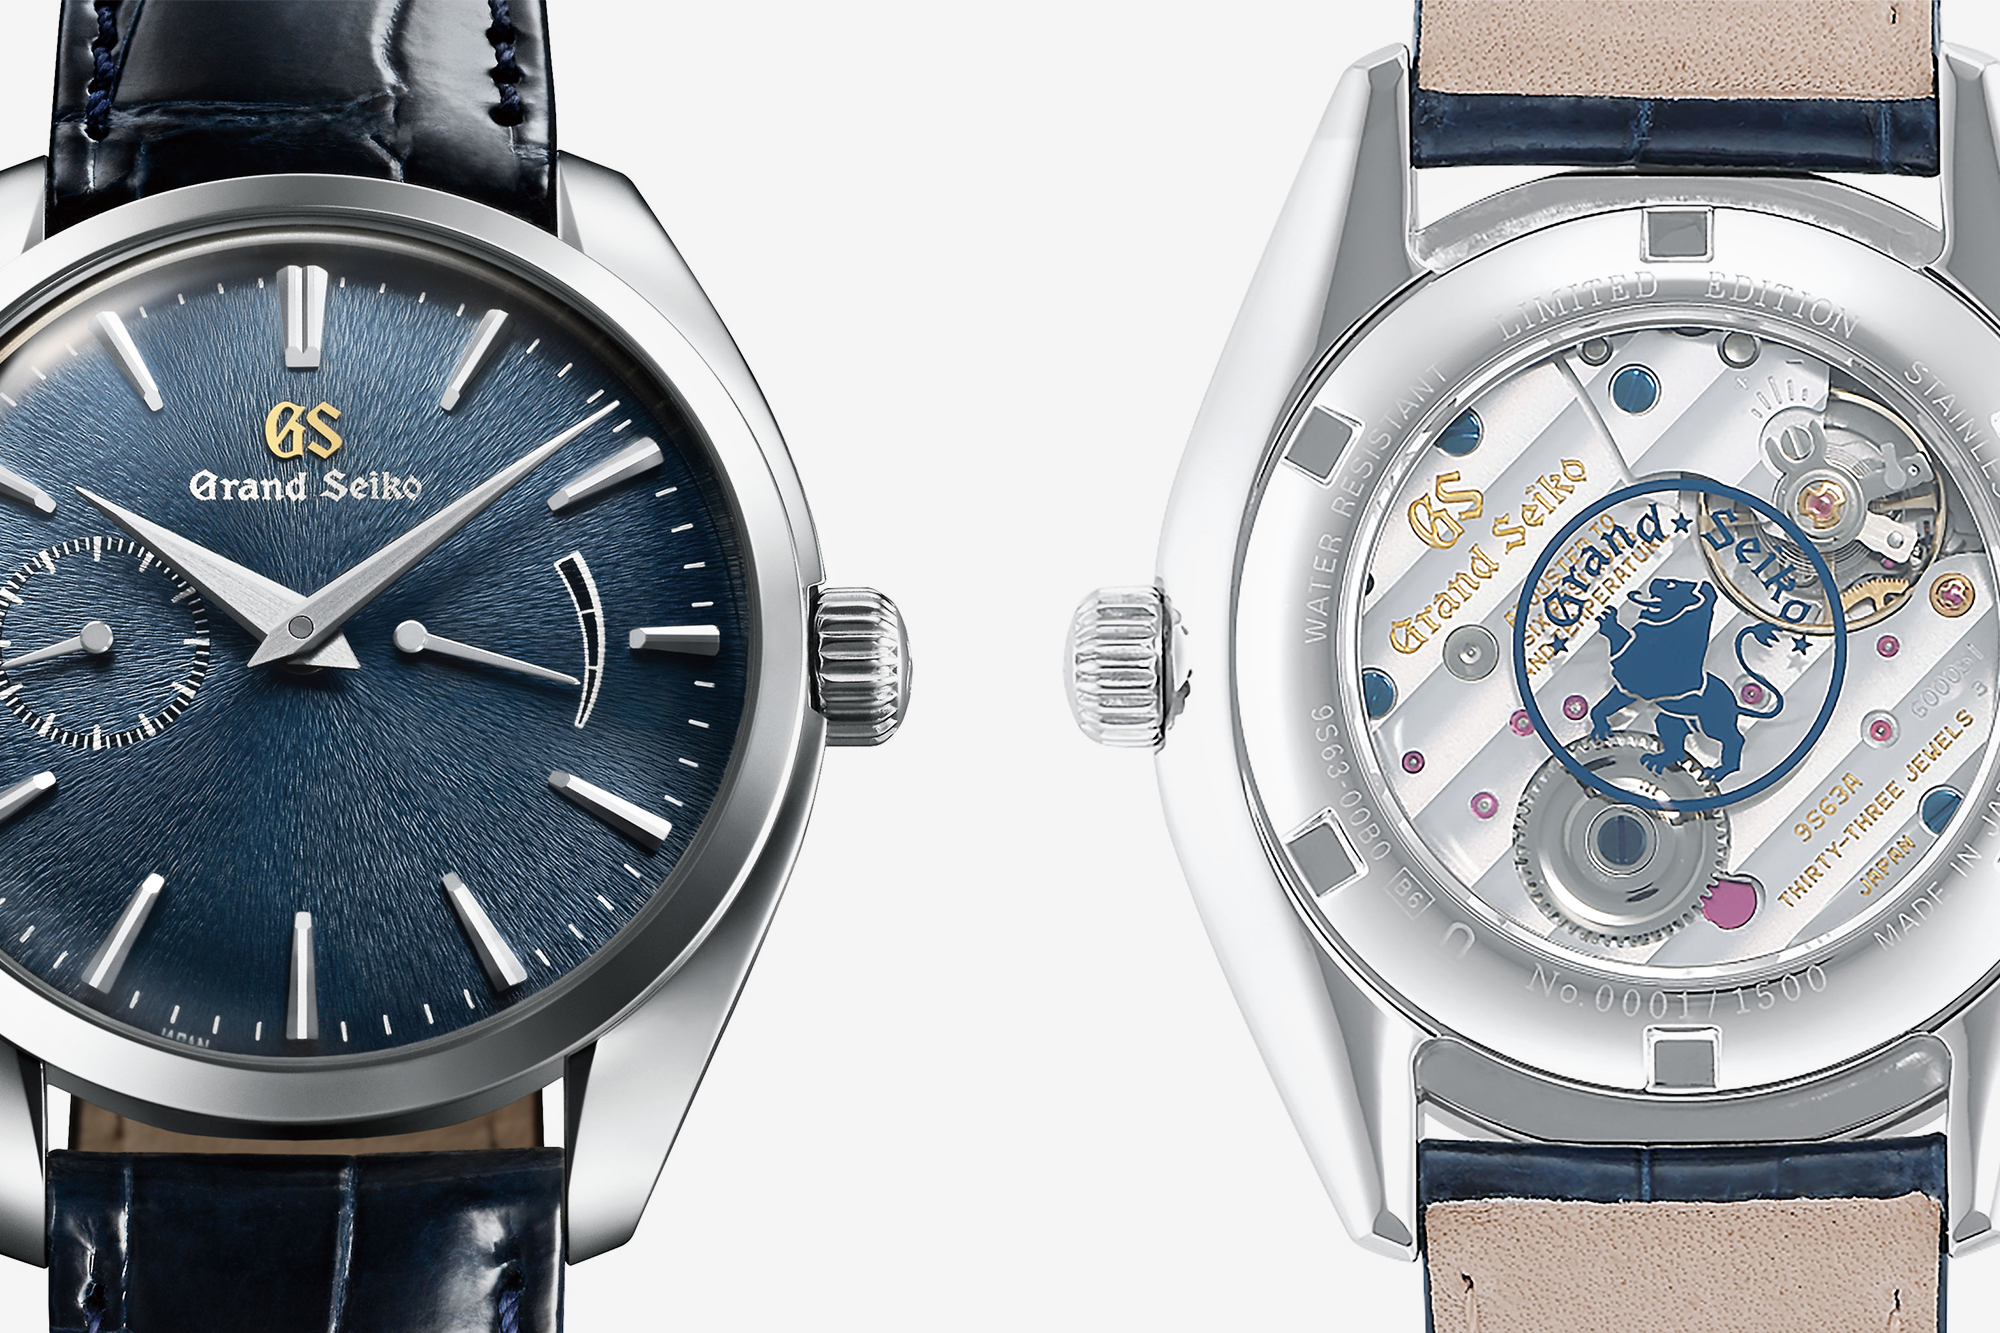 Introducing the New Grand Seiko Elegance Collection (Refs. SBGK002, SBGK004, SBGK005, and SBGK006) and 9S63 Caliber